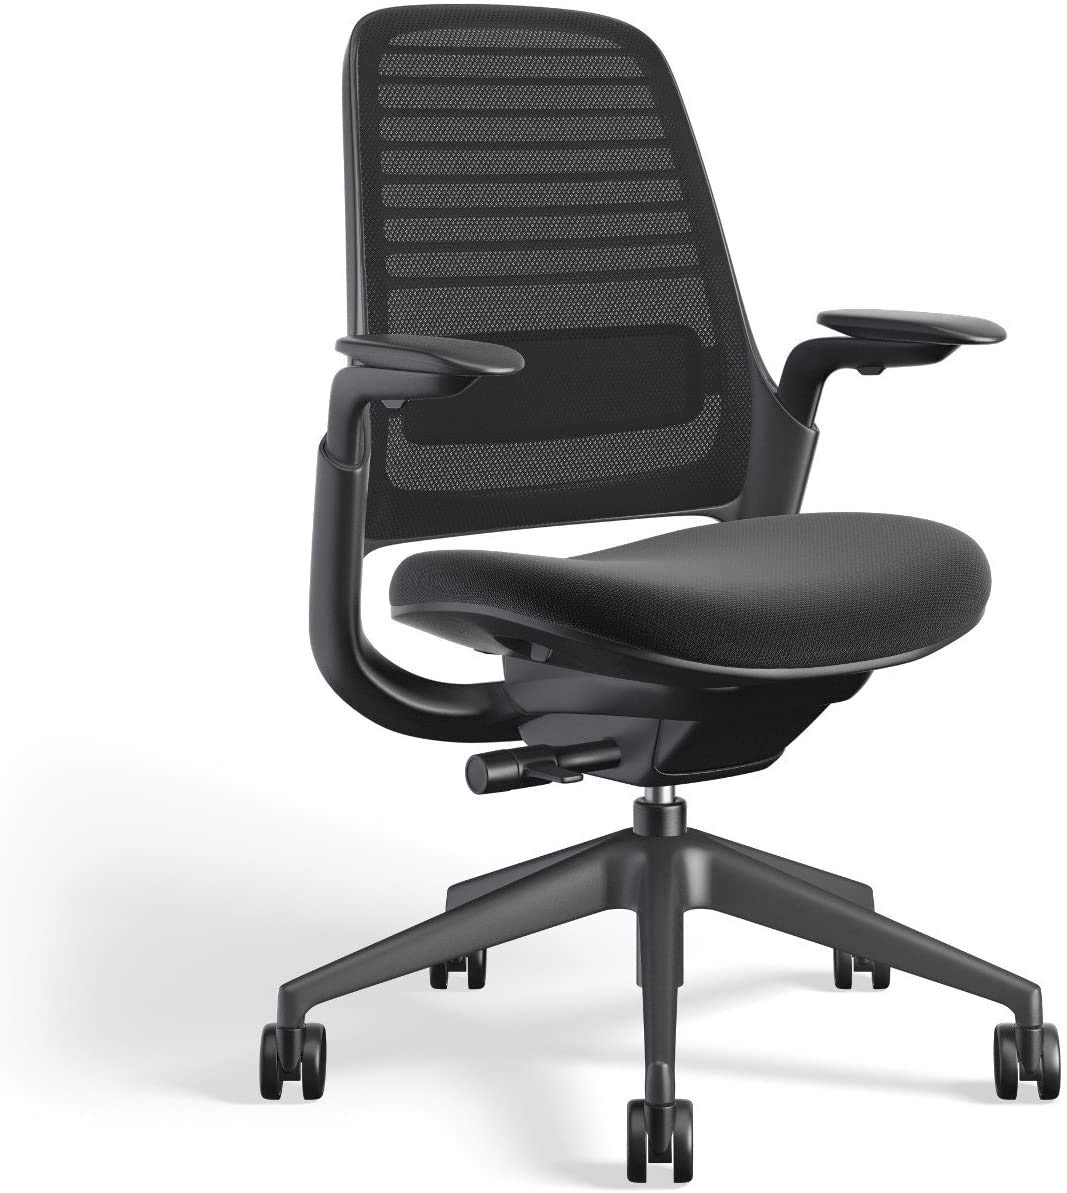 Steelcase Series 1 Work Office Chair - Licorice, Hard Floor Casters